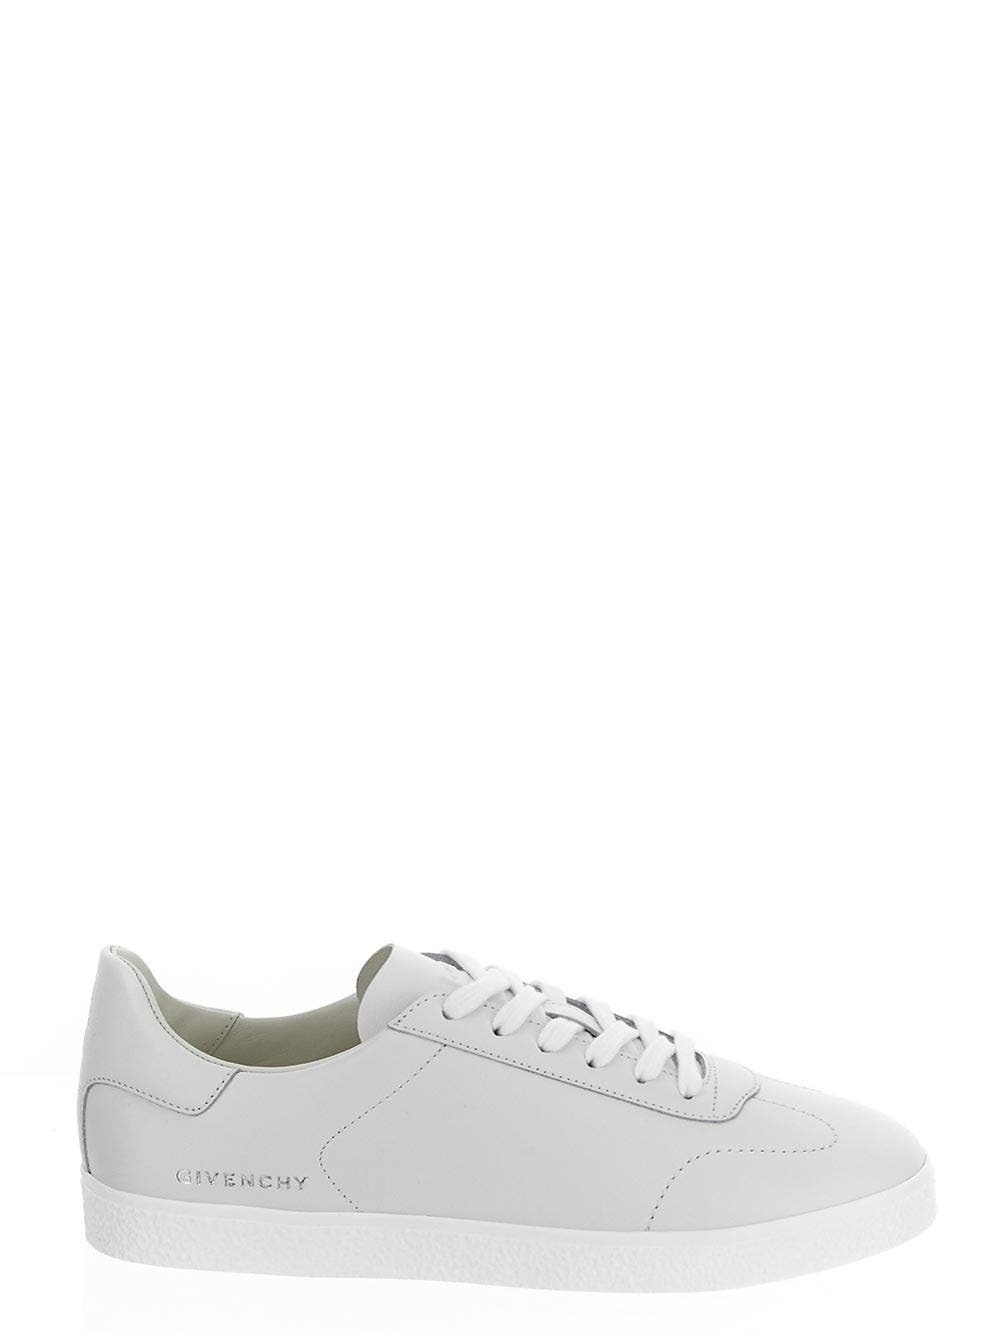 Photo: Givenchy Town Sneaker